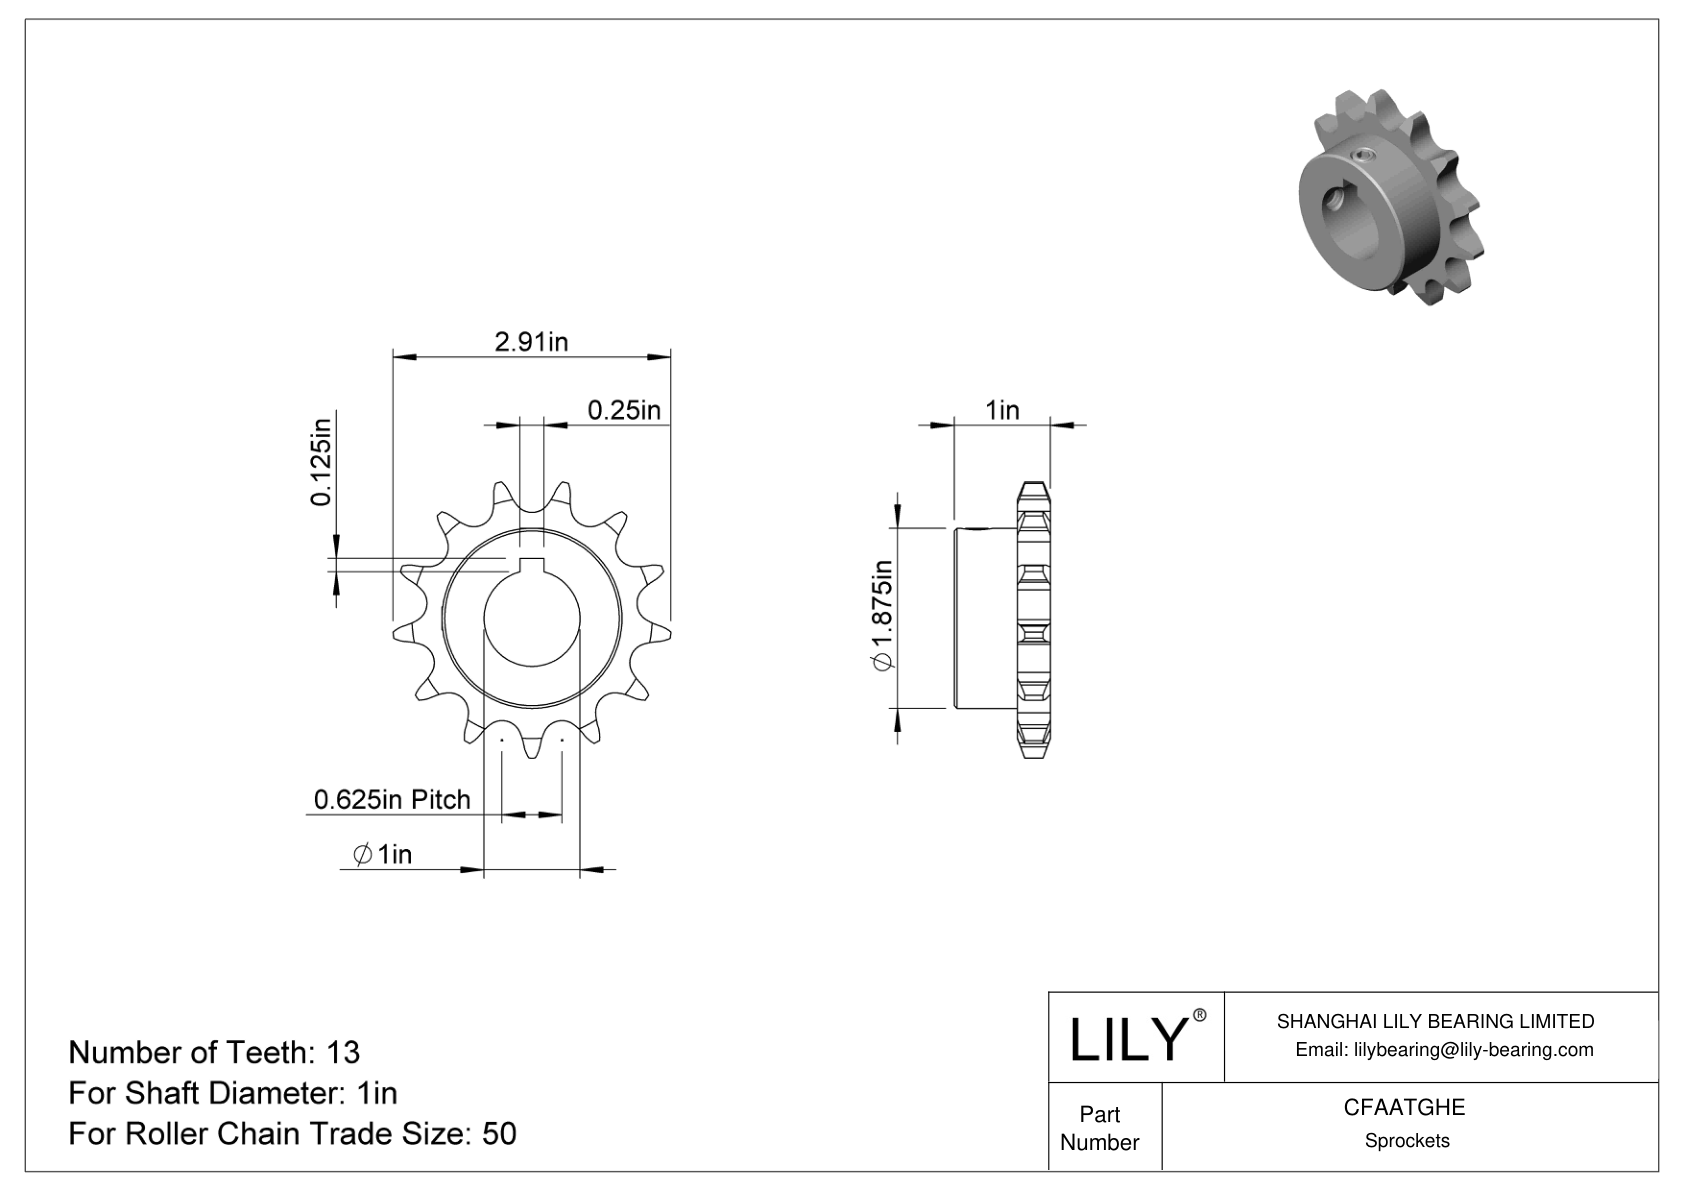 CFAATGHE Wear-Resistant Sprockets for ANSI Roller Chain cad drawing